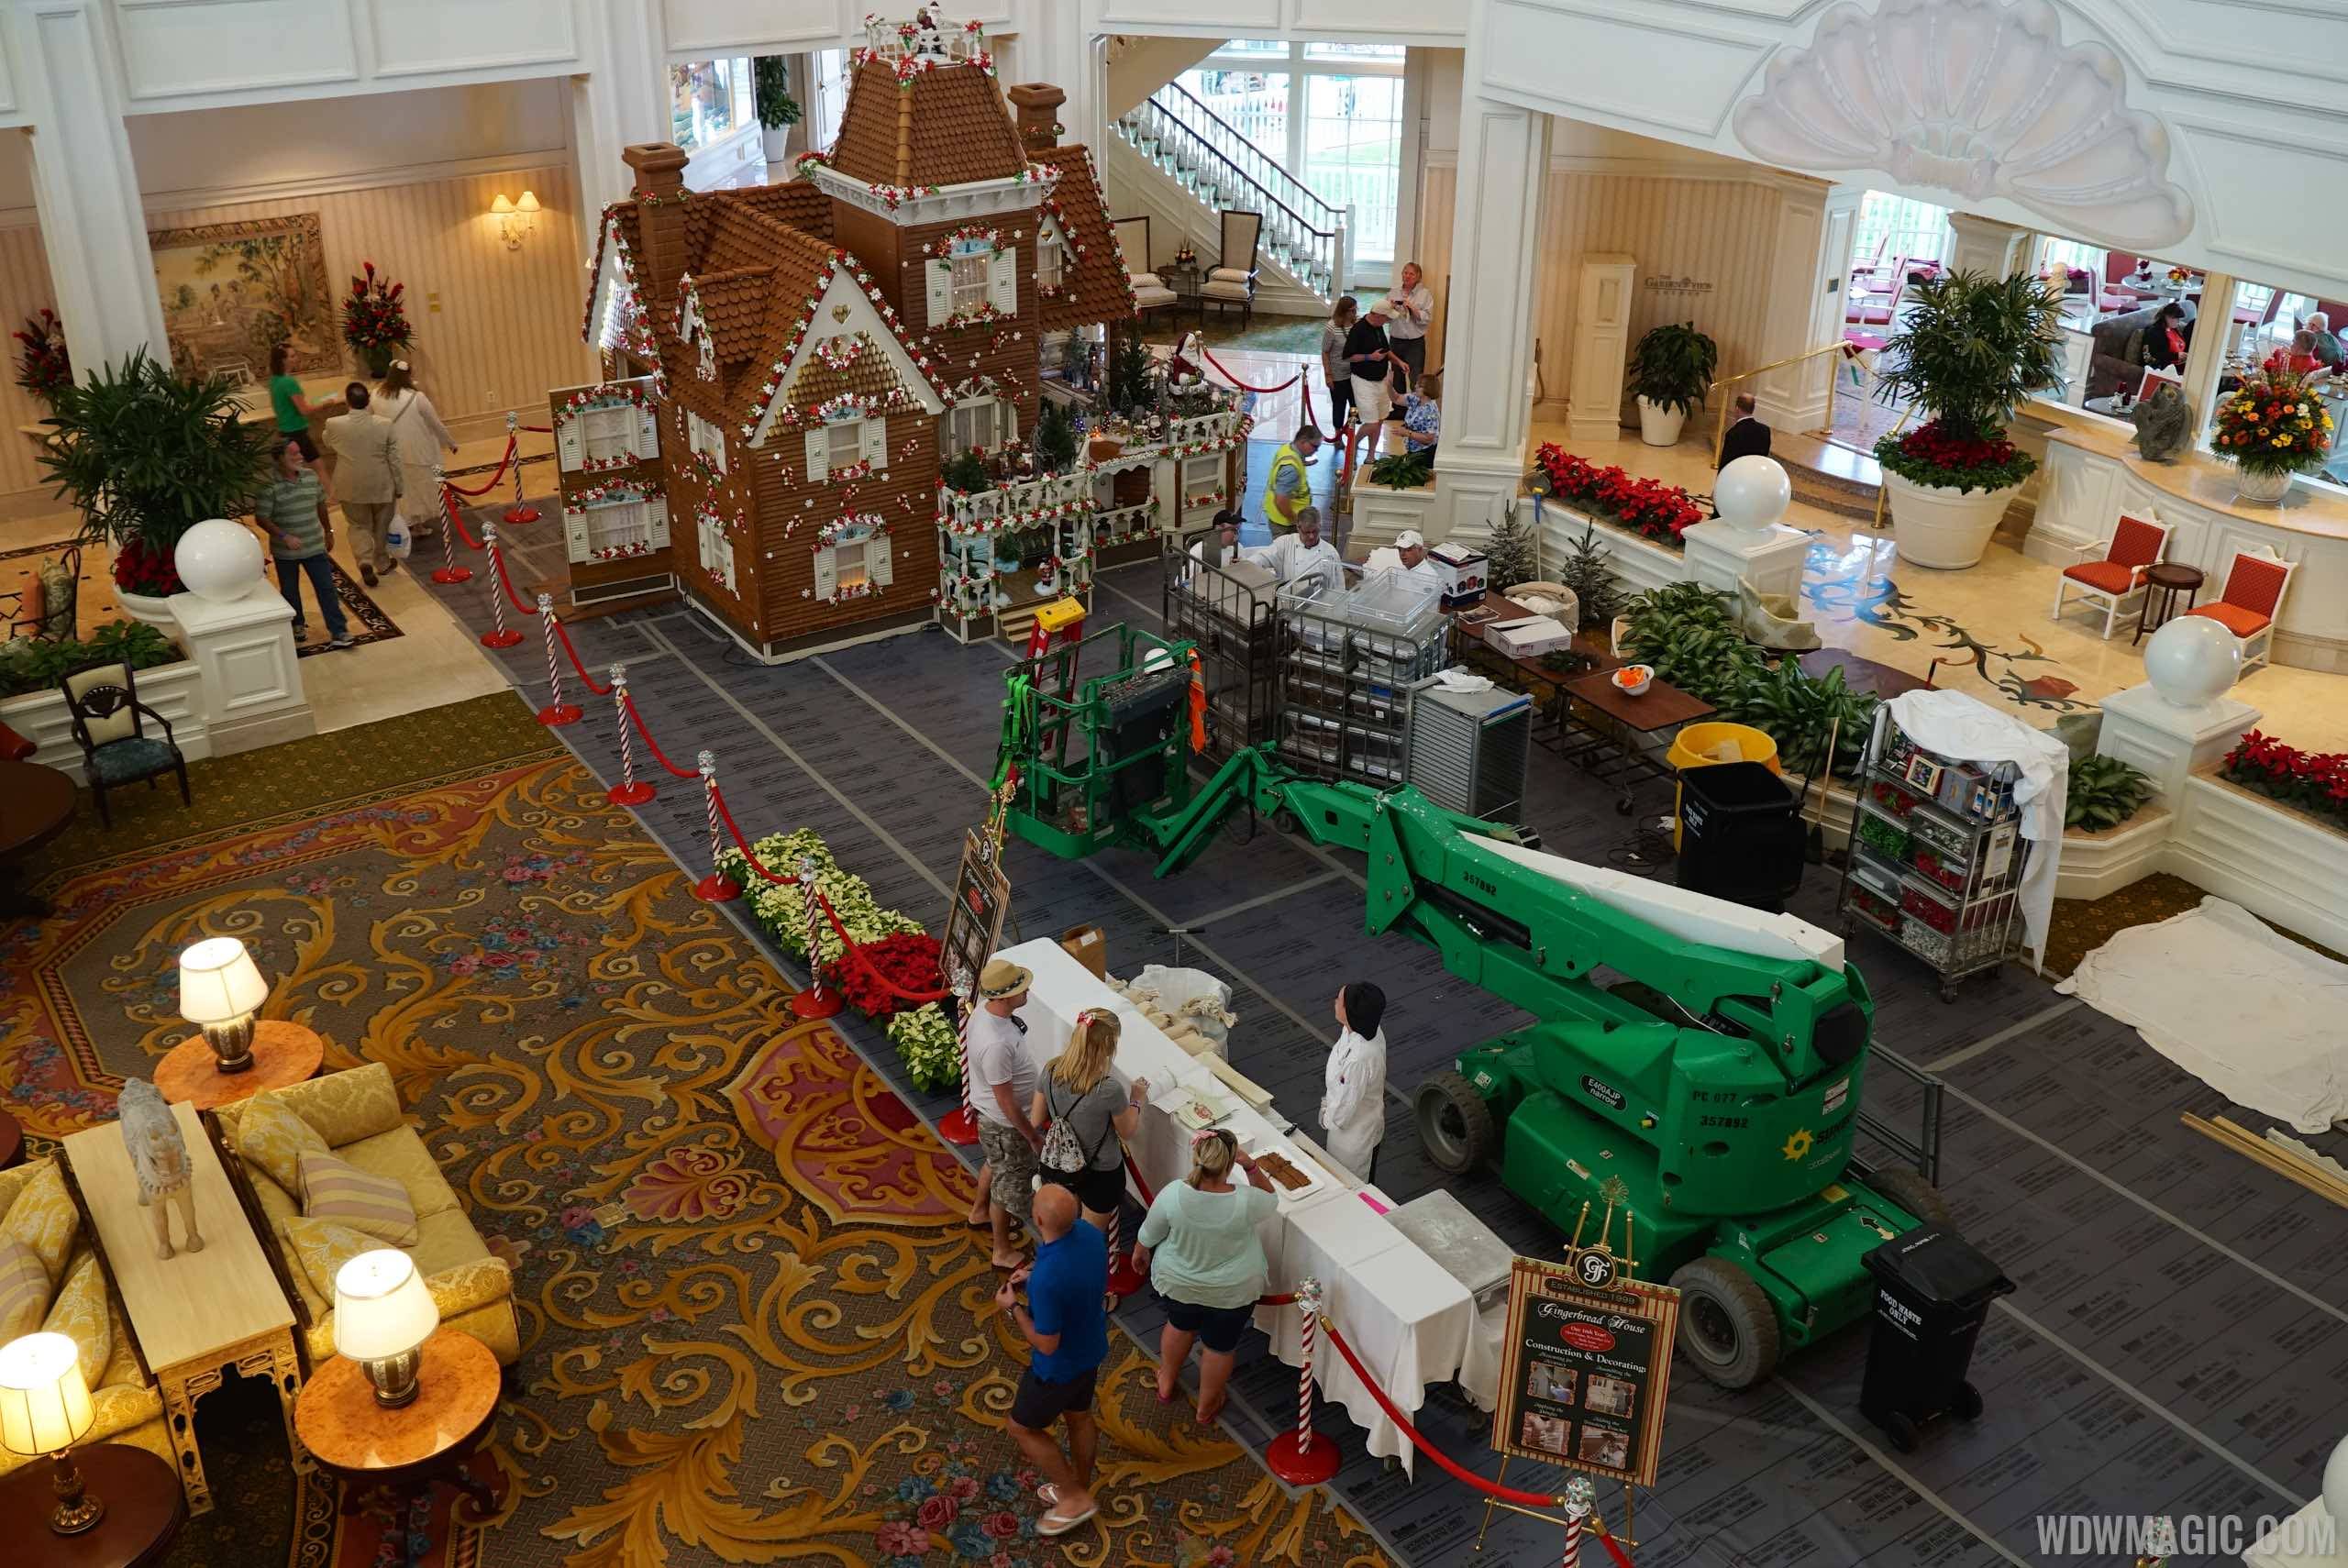 Gingerbread House at Disney's Grand Floridian Resort takes shape ahead of next week's opening